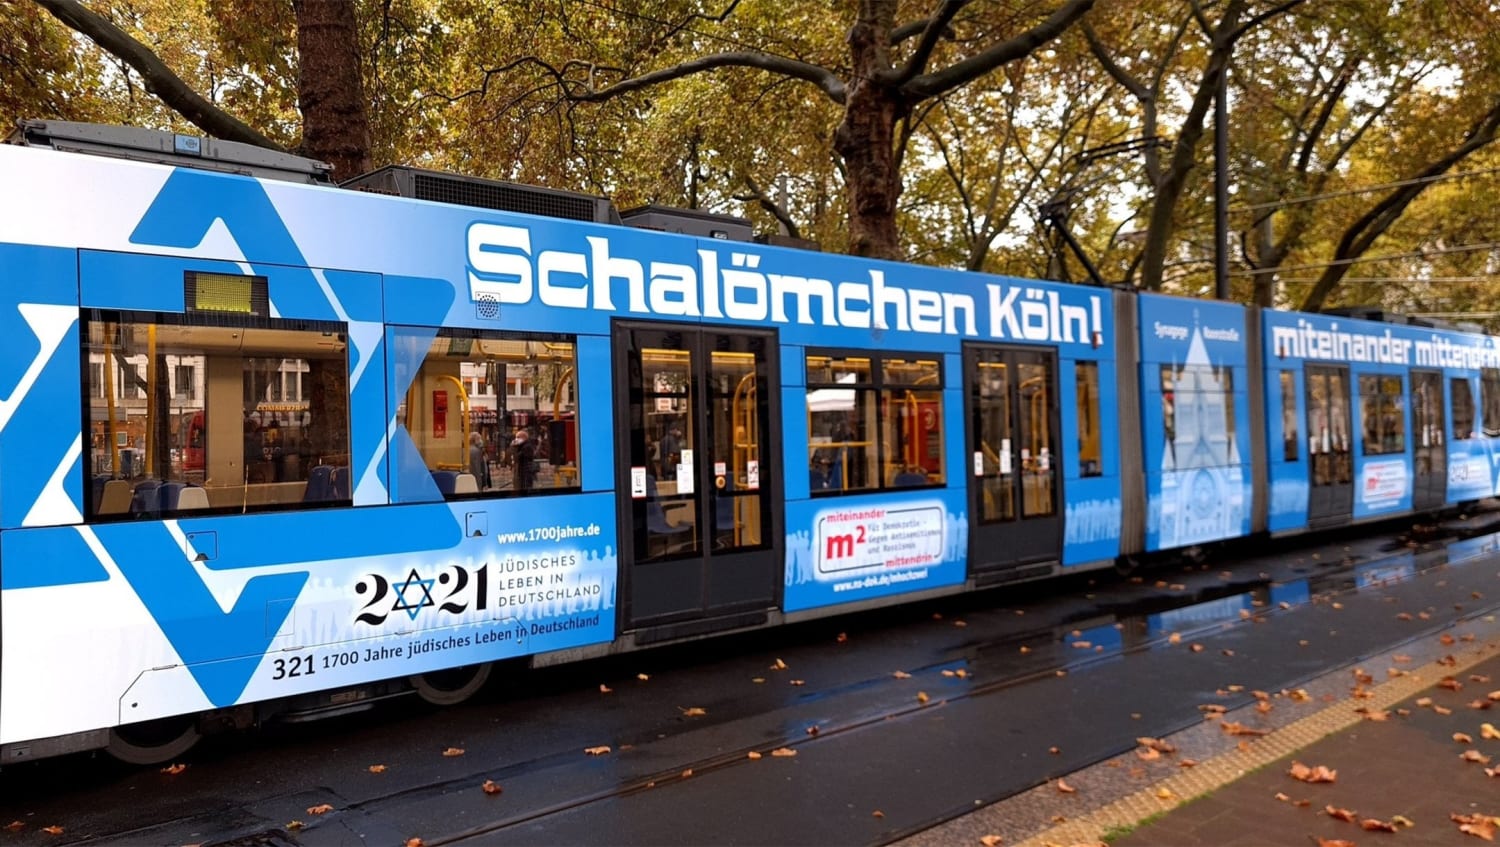 Tram in Cologne, Germany gets giant Star of David and 'shalom' stickers to celebrate 1,700 years of German Jewish life